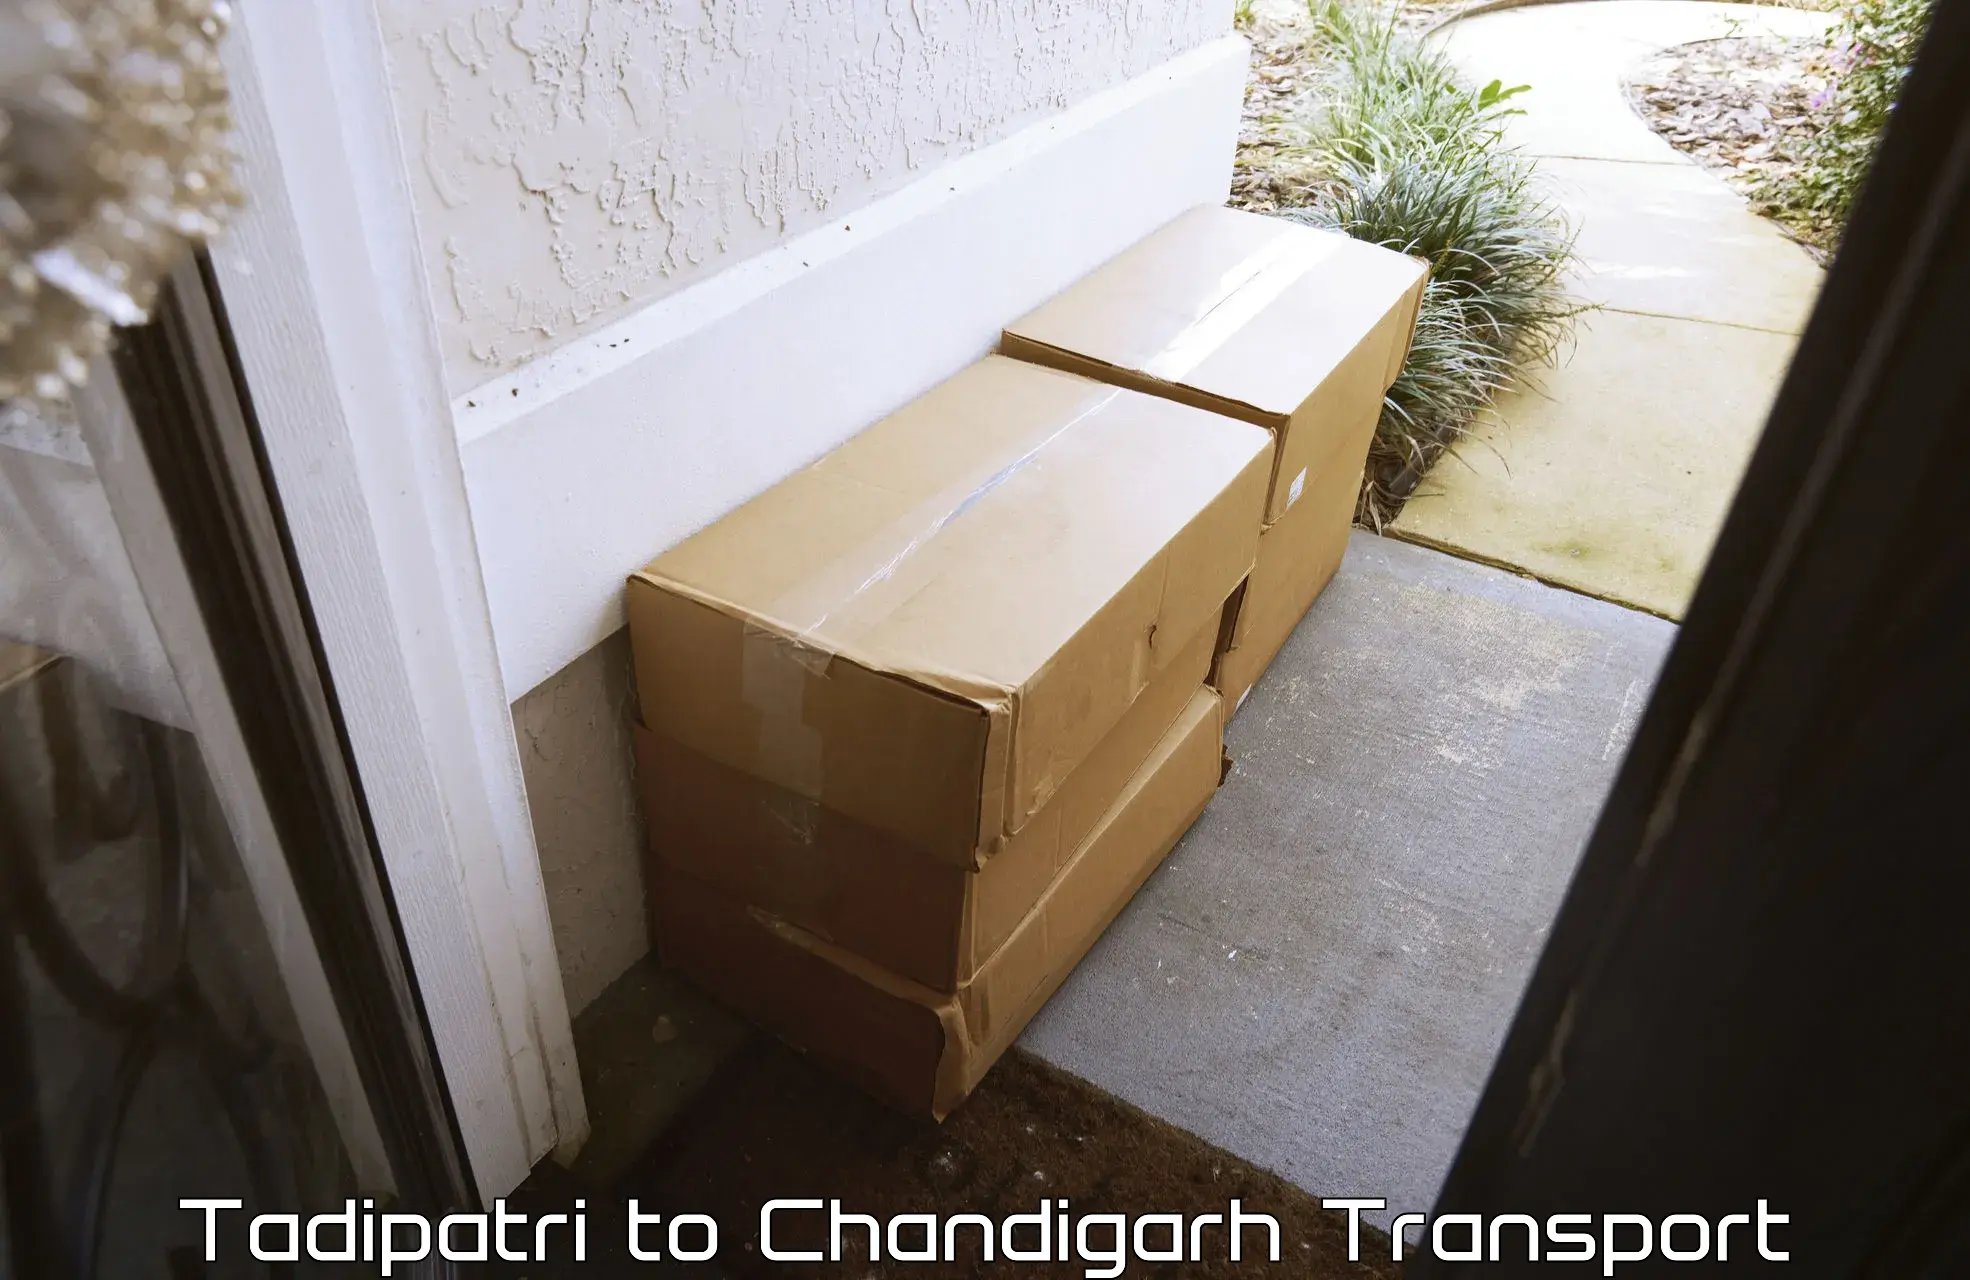 Pick up transport service in Tadipatri to Chandigarh